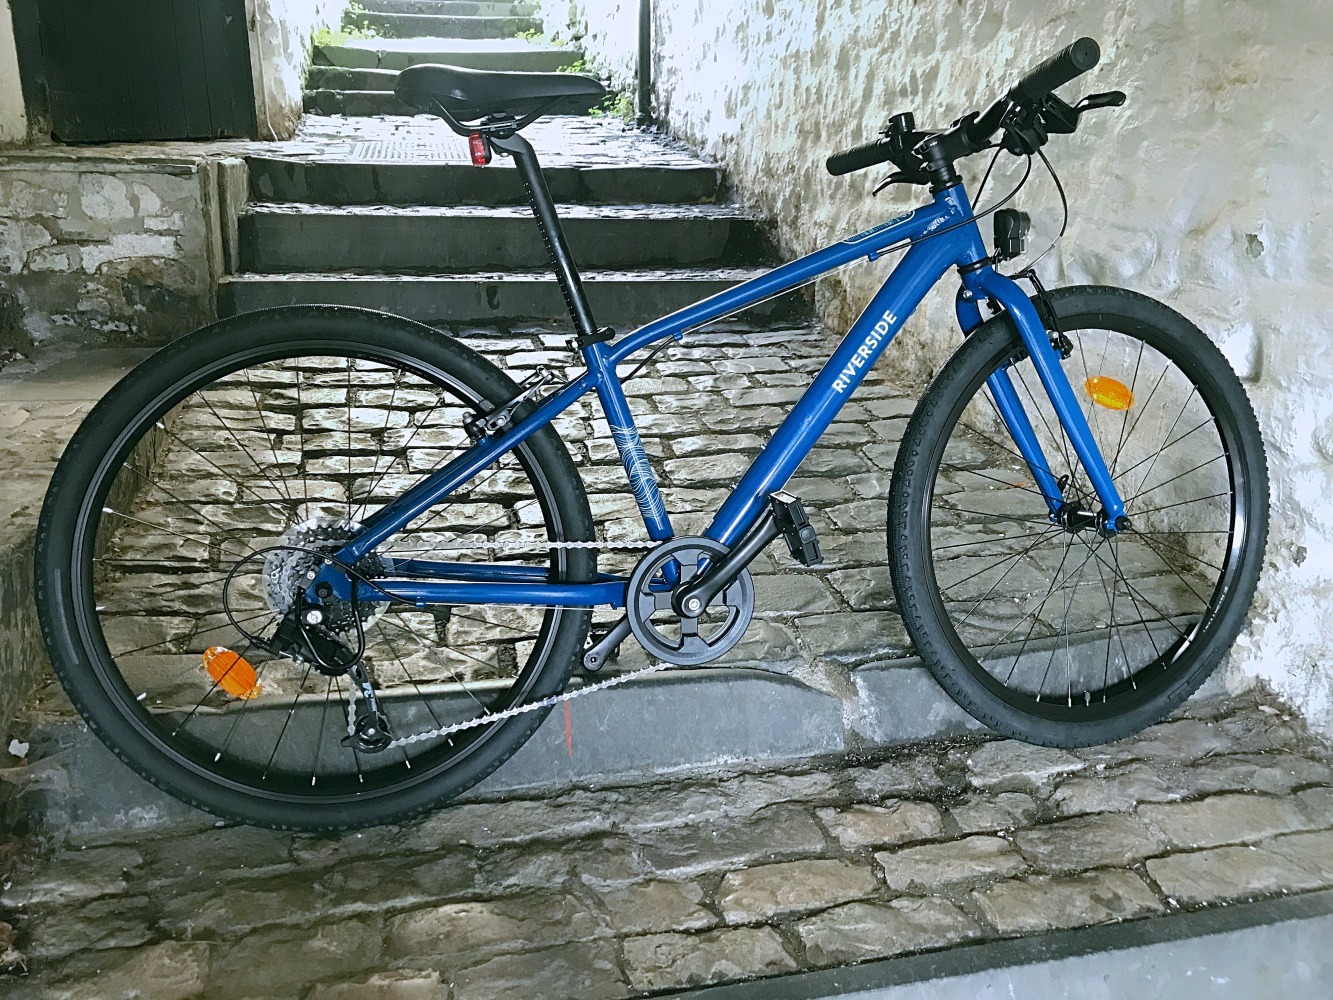 BTwin Riverside 900 26 inch wheel hybrid photographed in an old cobbled passageway